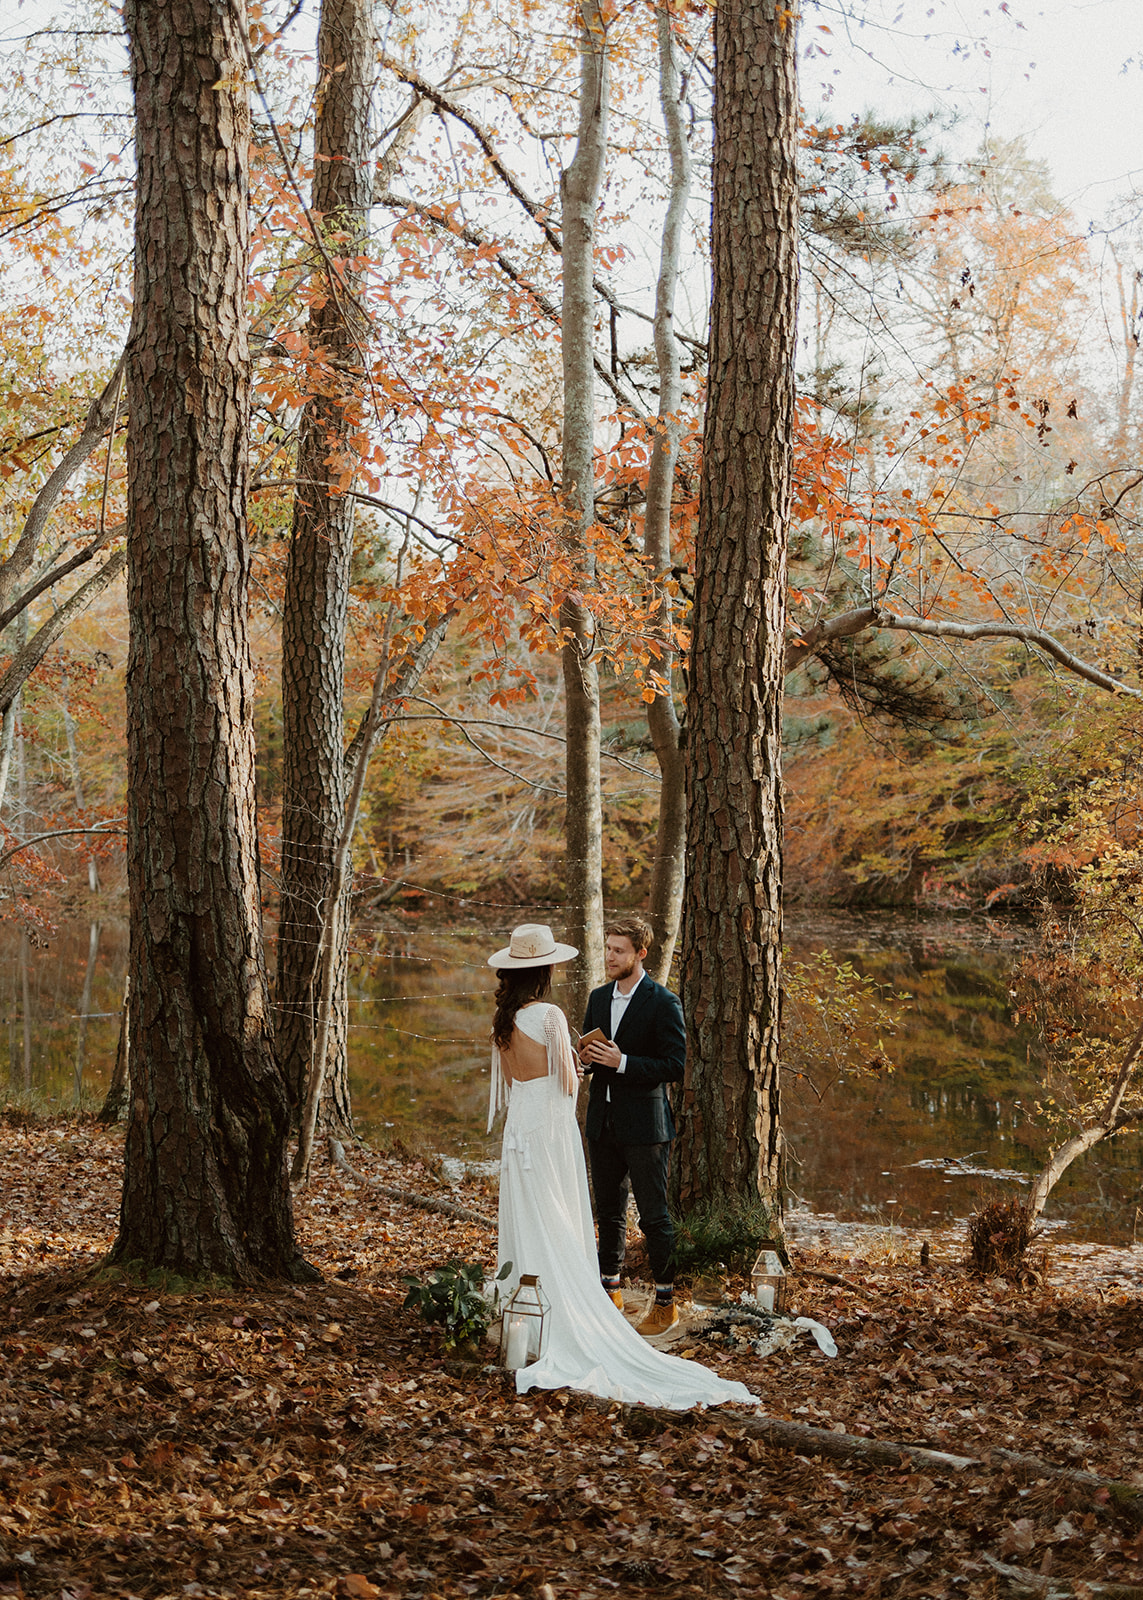 the couple standing in the woods during their elopement in Georgia